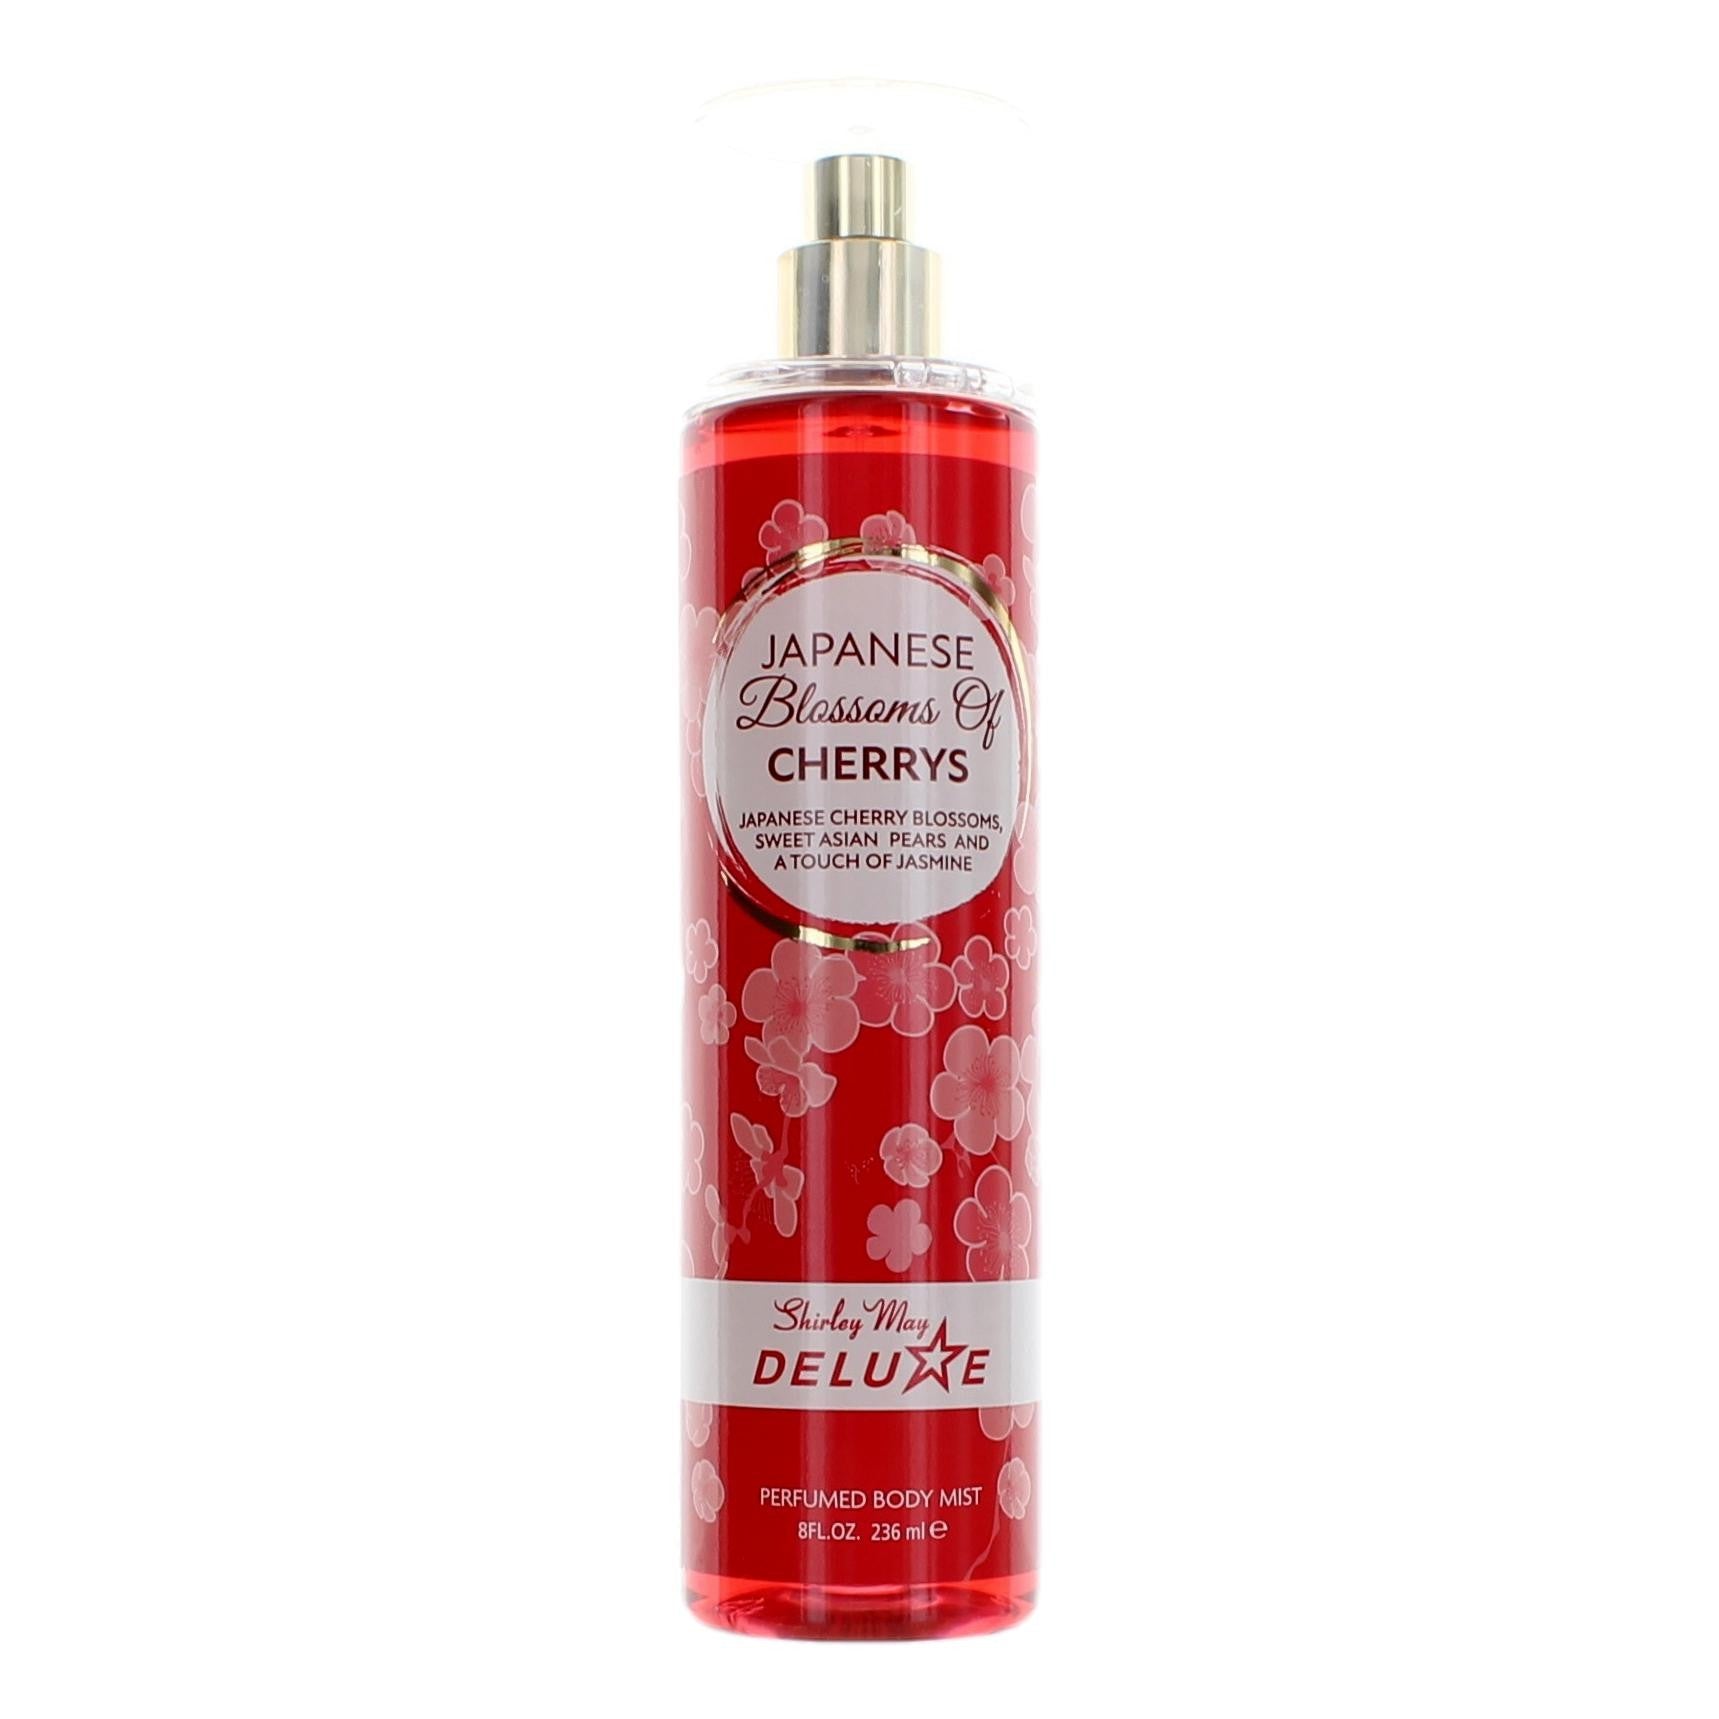 Bottle of Japanese Blossom Of Cherrys by Shirley May Deluxe, 8 oz Perfumed Body Mist for Women